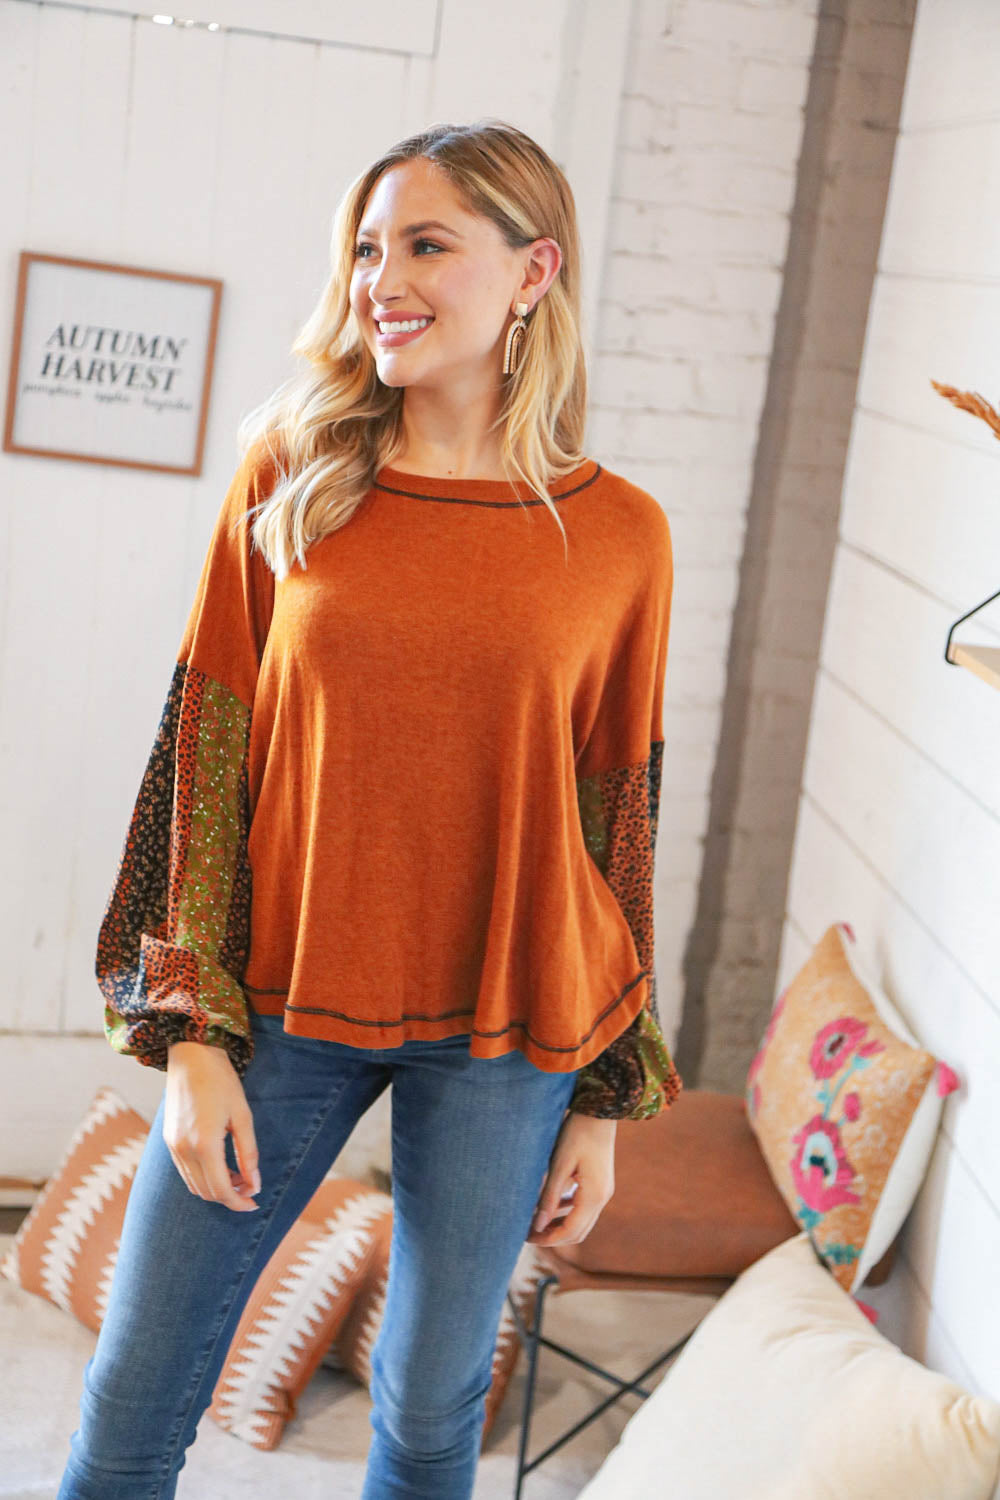 Blessings Abound - Soft Sweater Top